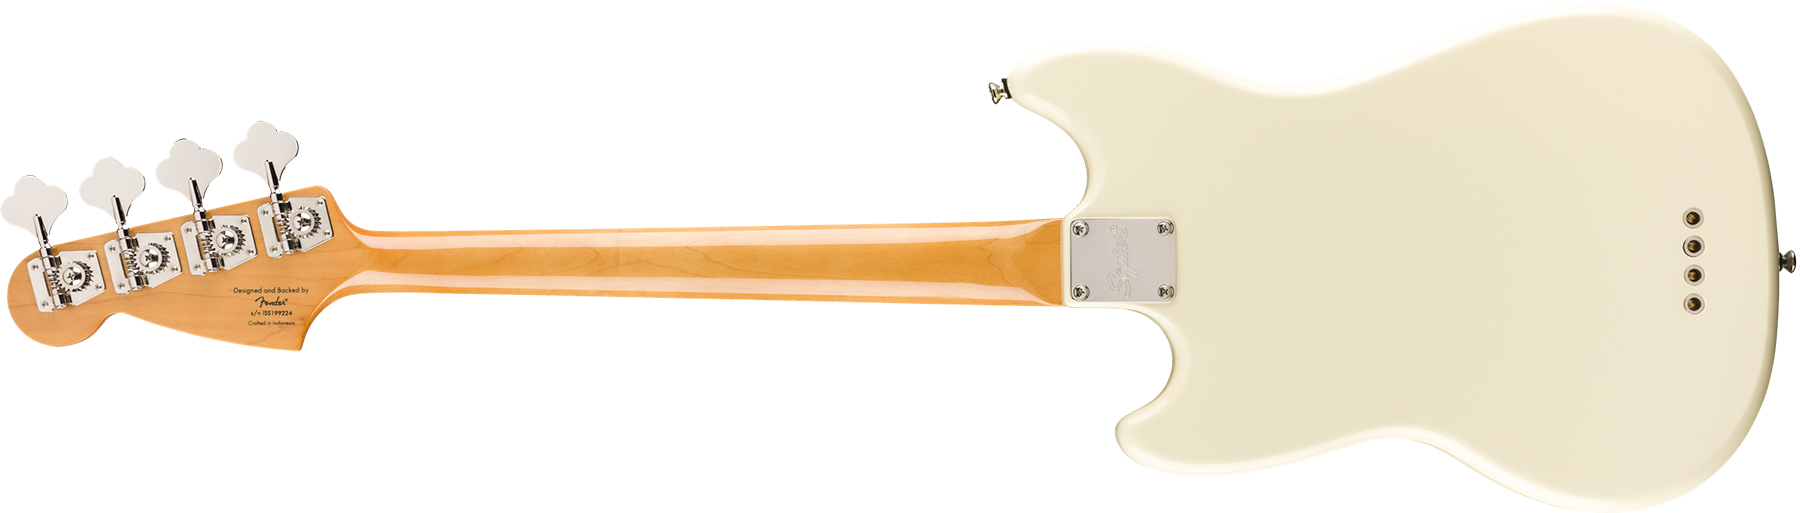 Squier Mustang Bass '60s Classic Vibe Lau 2019 - Olympic White - Solid body electric bass - Variation 1